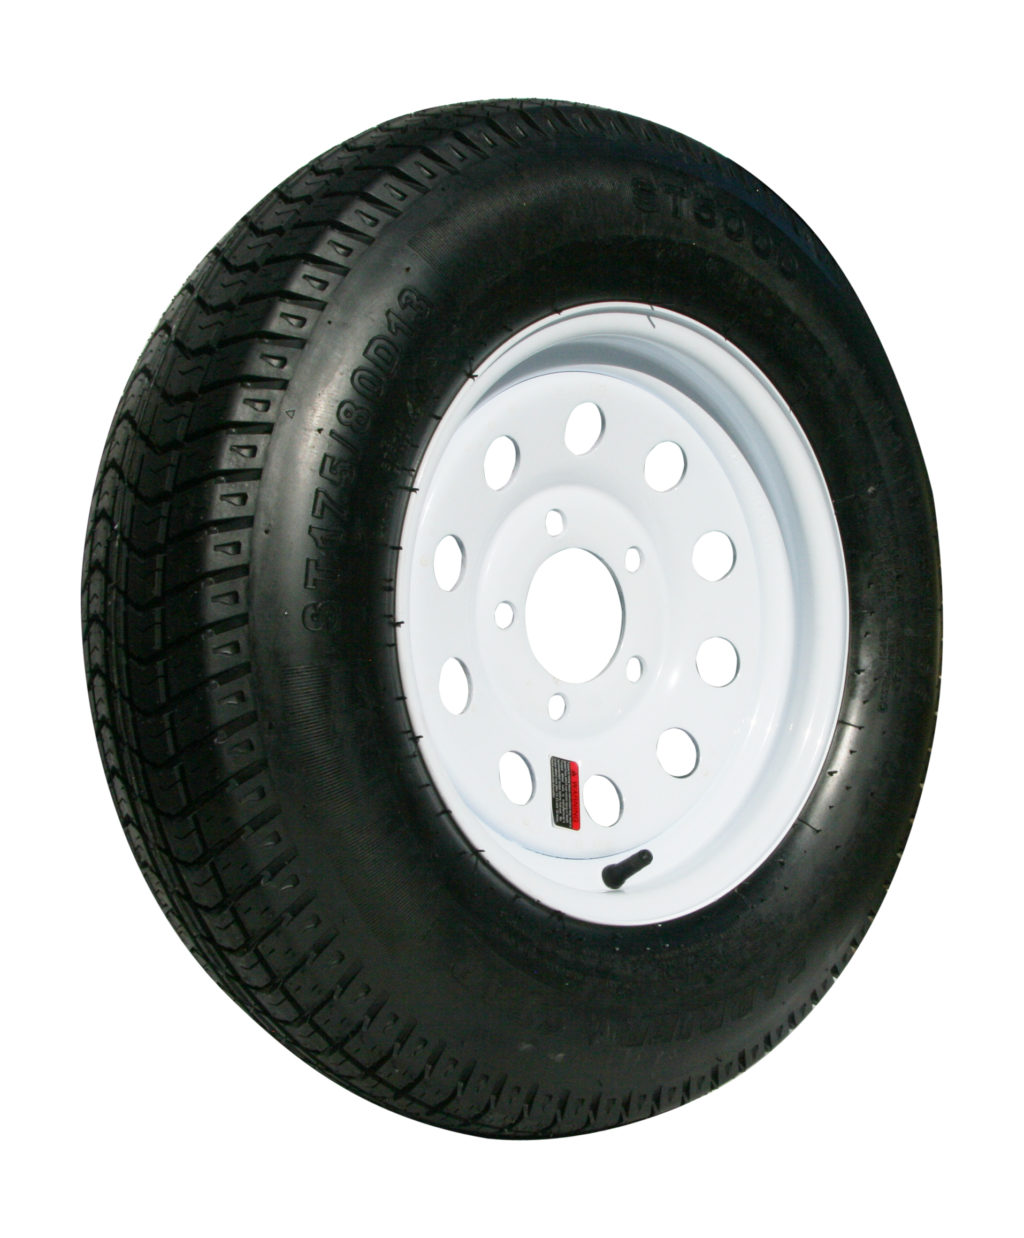 TIRE WITH WHITE MOD WHEEL